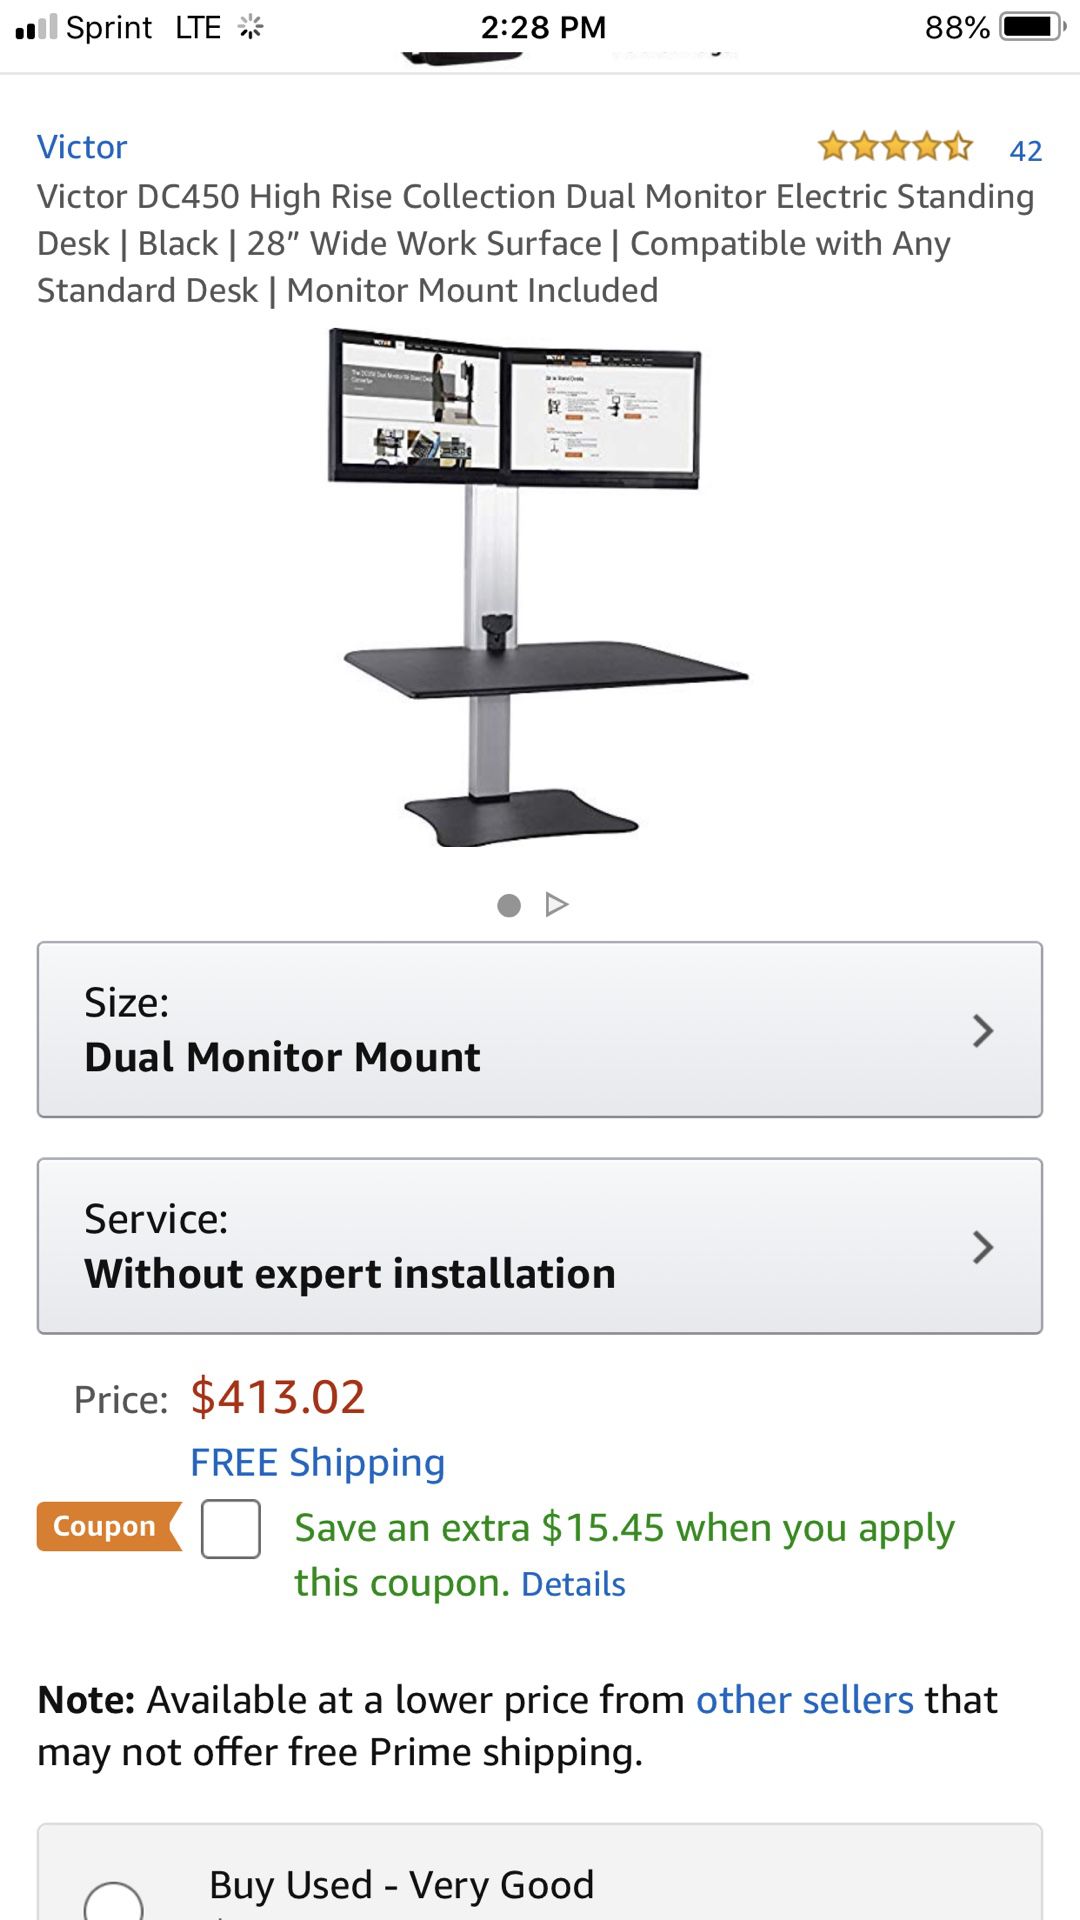 Victor DC450 High Rise Collection Dual Monitor Electric Standing Desk | Black | 28” Wide Work Surface | Monitor M